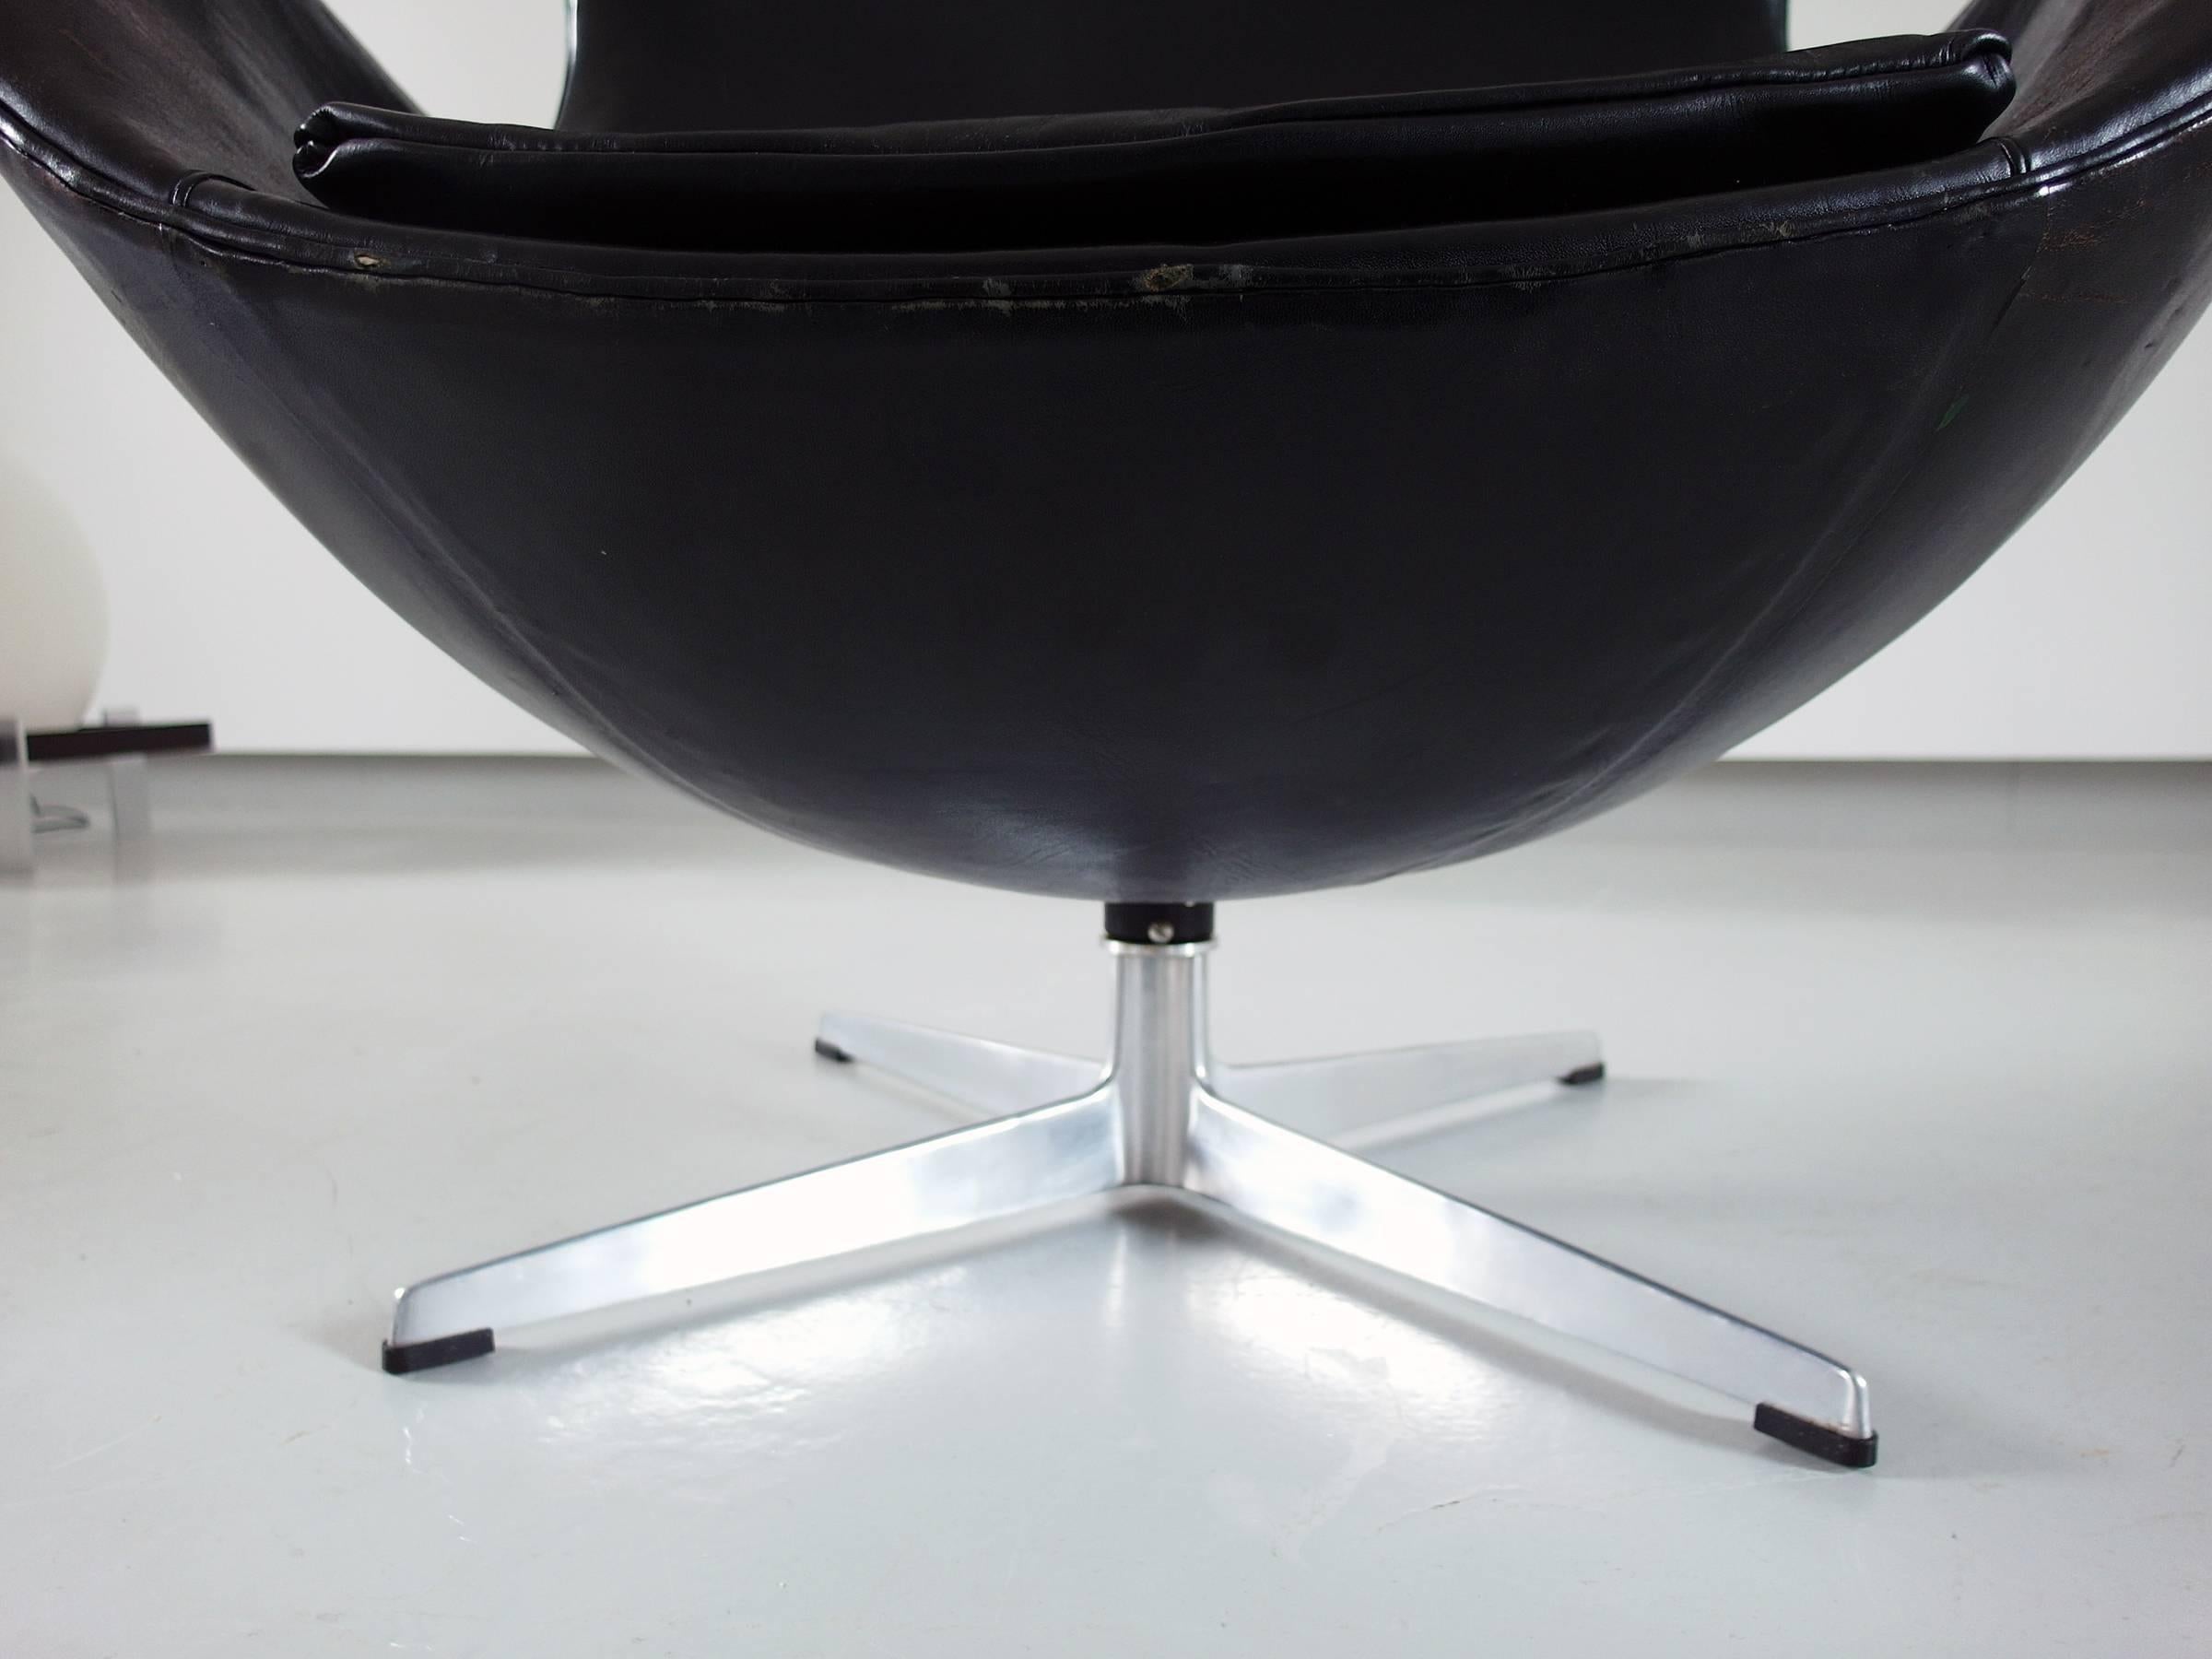 Early edition egg chair by Arne Jacobsen for Fritz Hansen, Denmark, 1966. The chair, model 3316, better known as Egg chair retains the original black leather which has a lovely patina from age and use. The chair is marked with manufacturers label